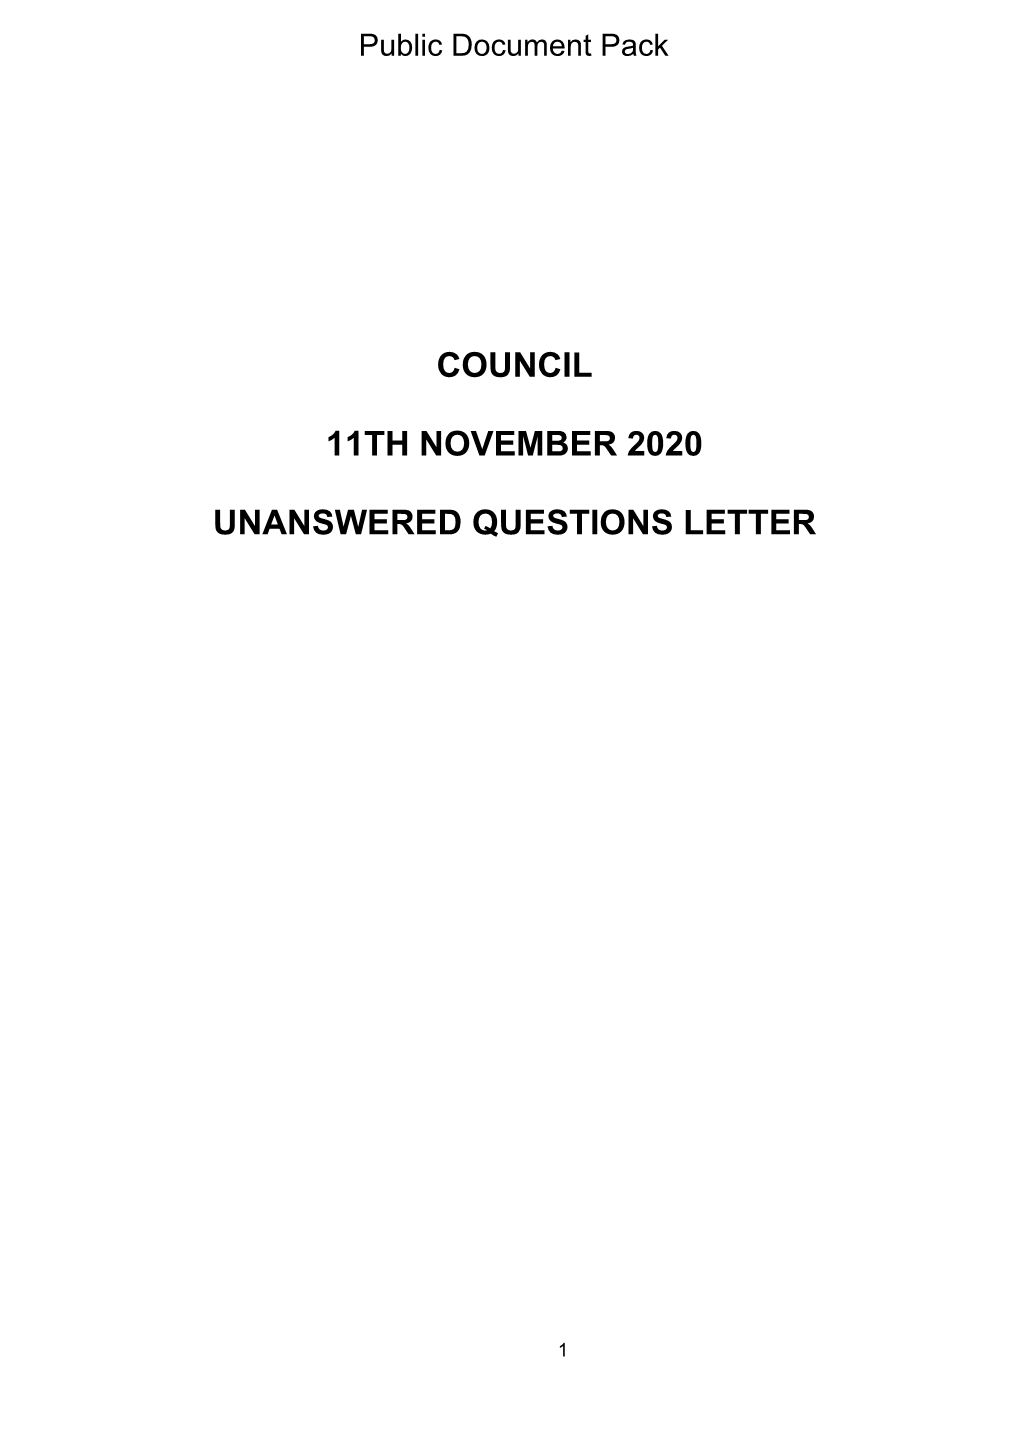 Council 11Th November 2020 Unanswered Questions Letter